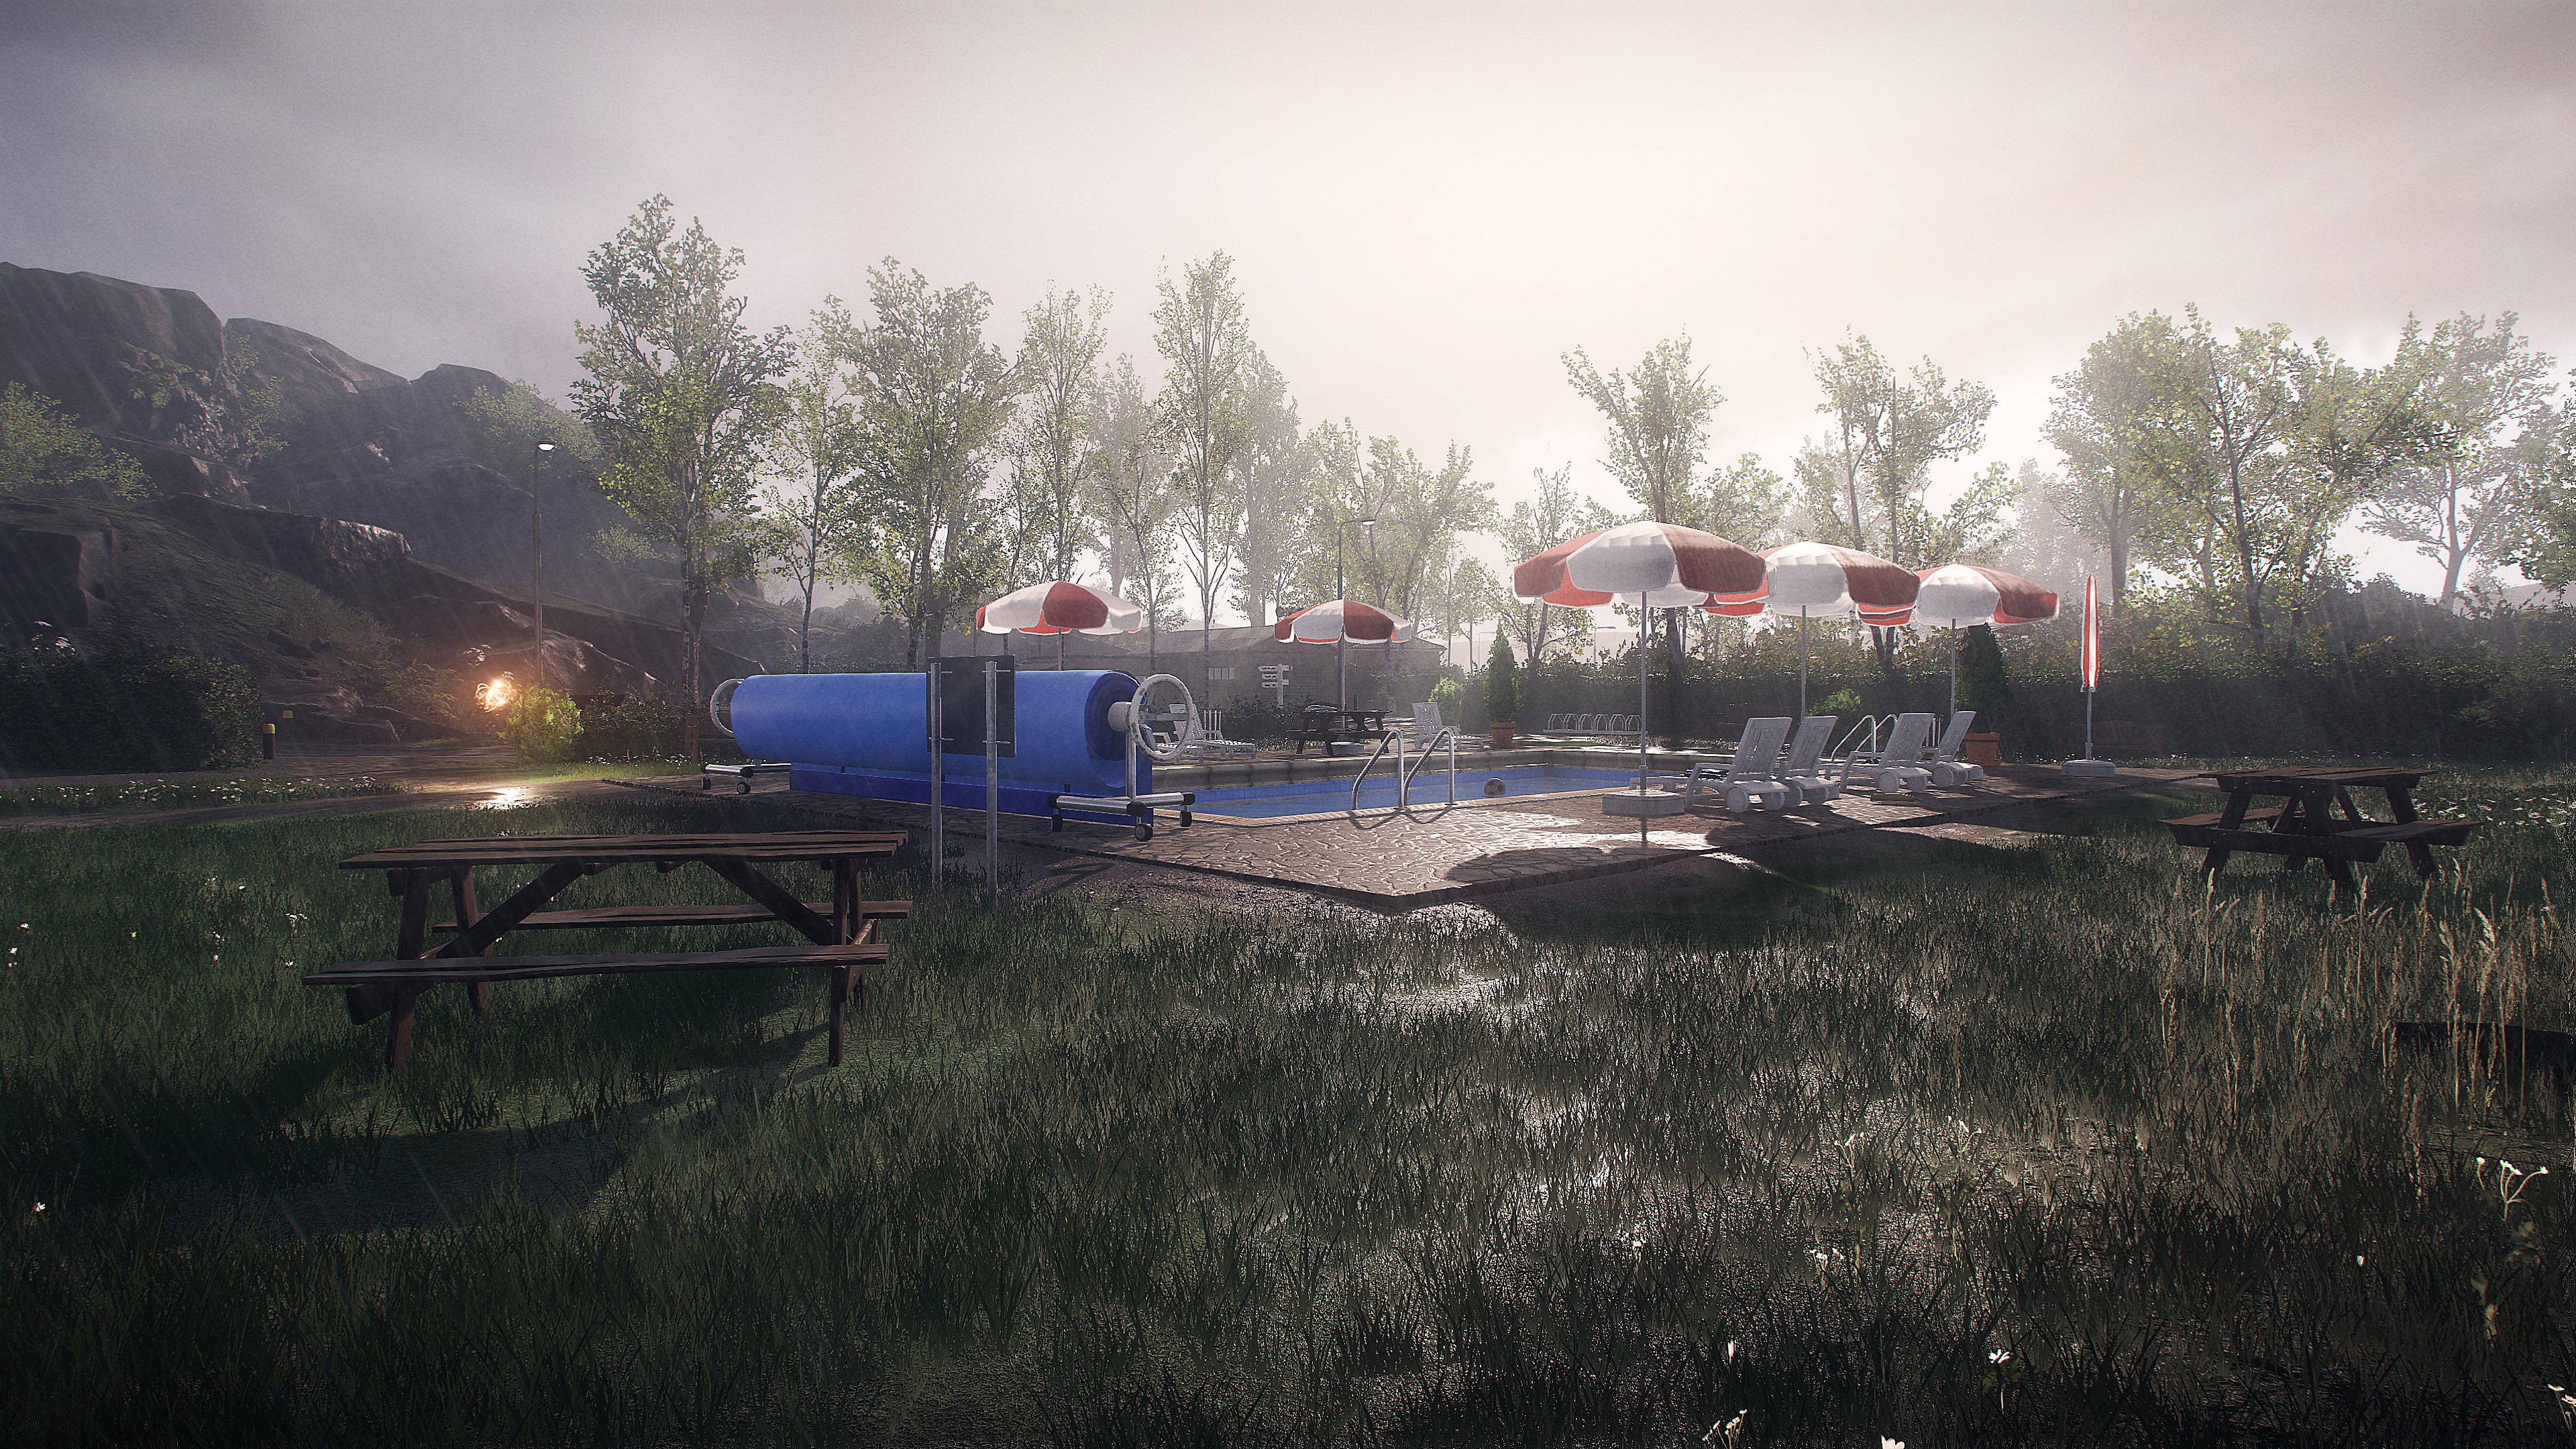 Everybody's Gone to the Rapture -幸福な消失- Gallery Screenshot 7